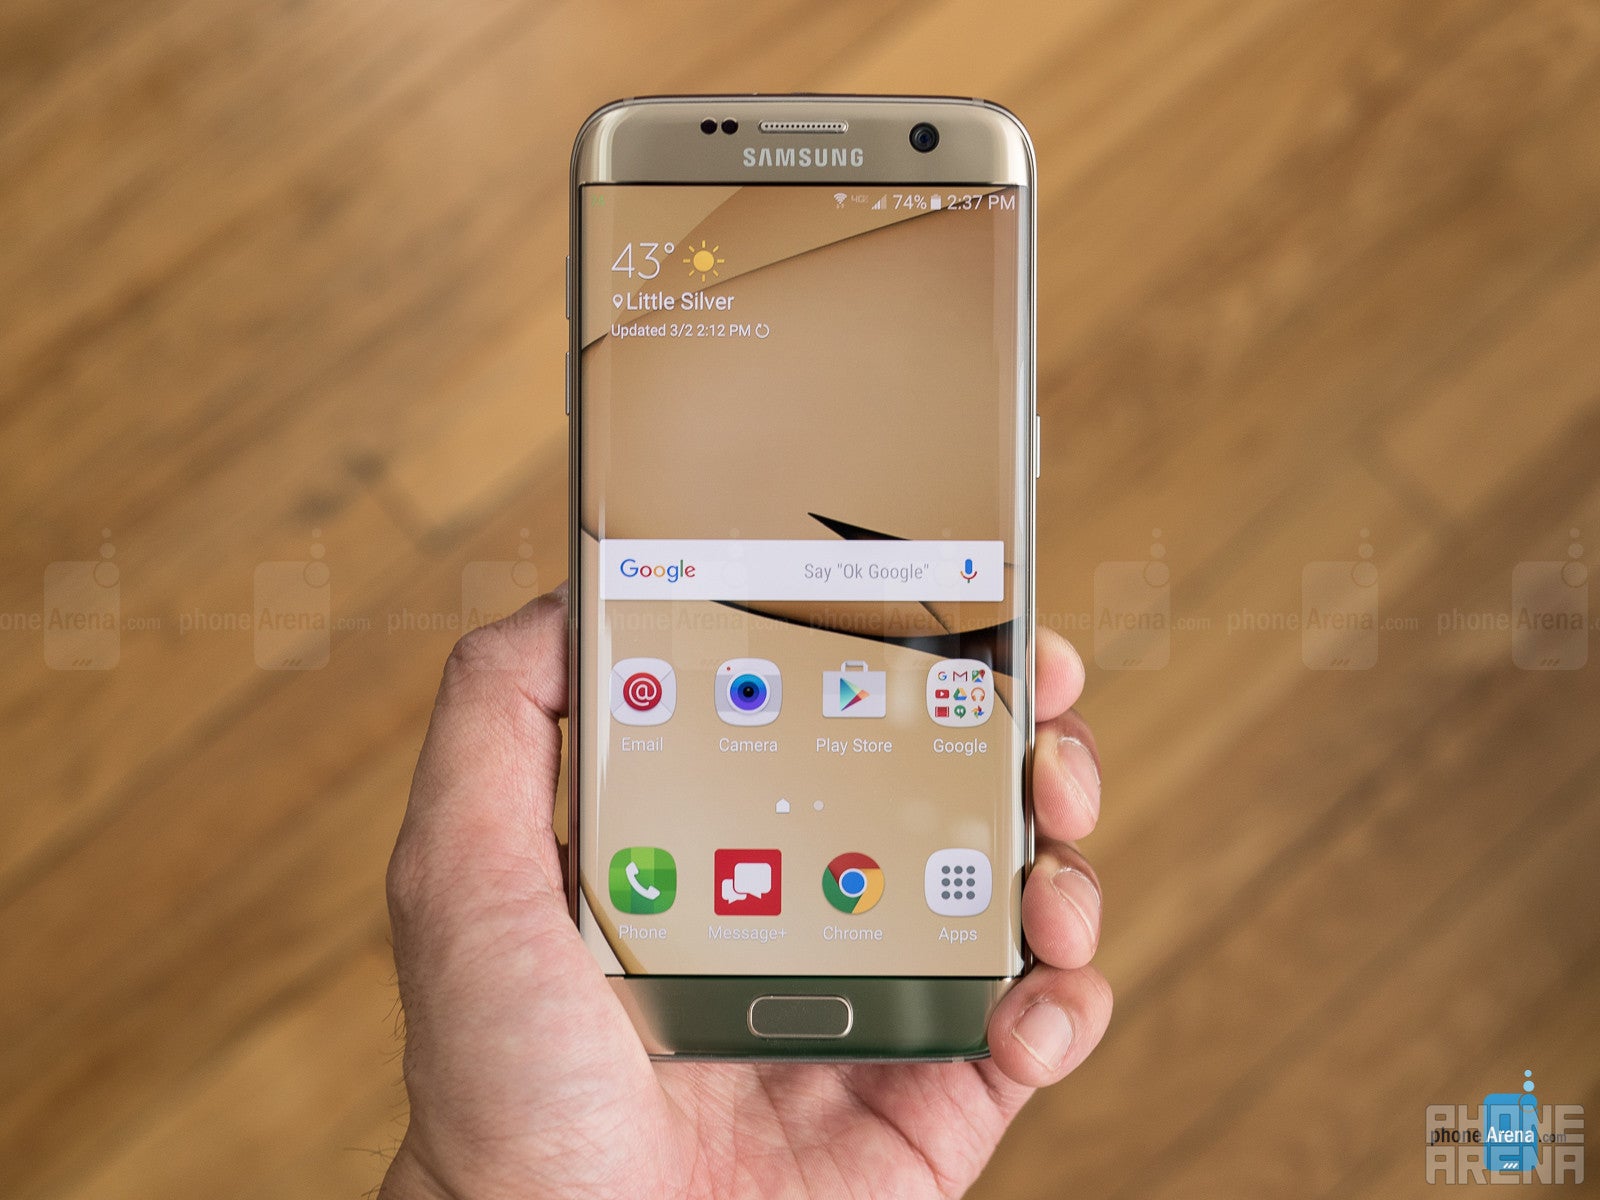 Why I think $800 is too much for the Galaxy S7 edge